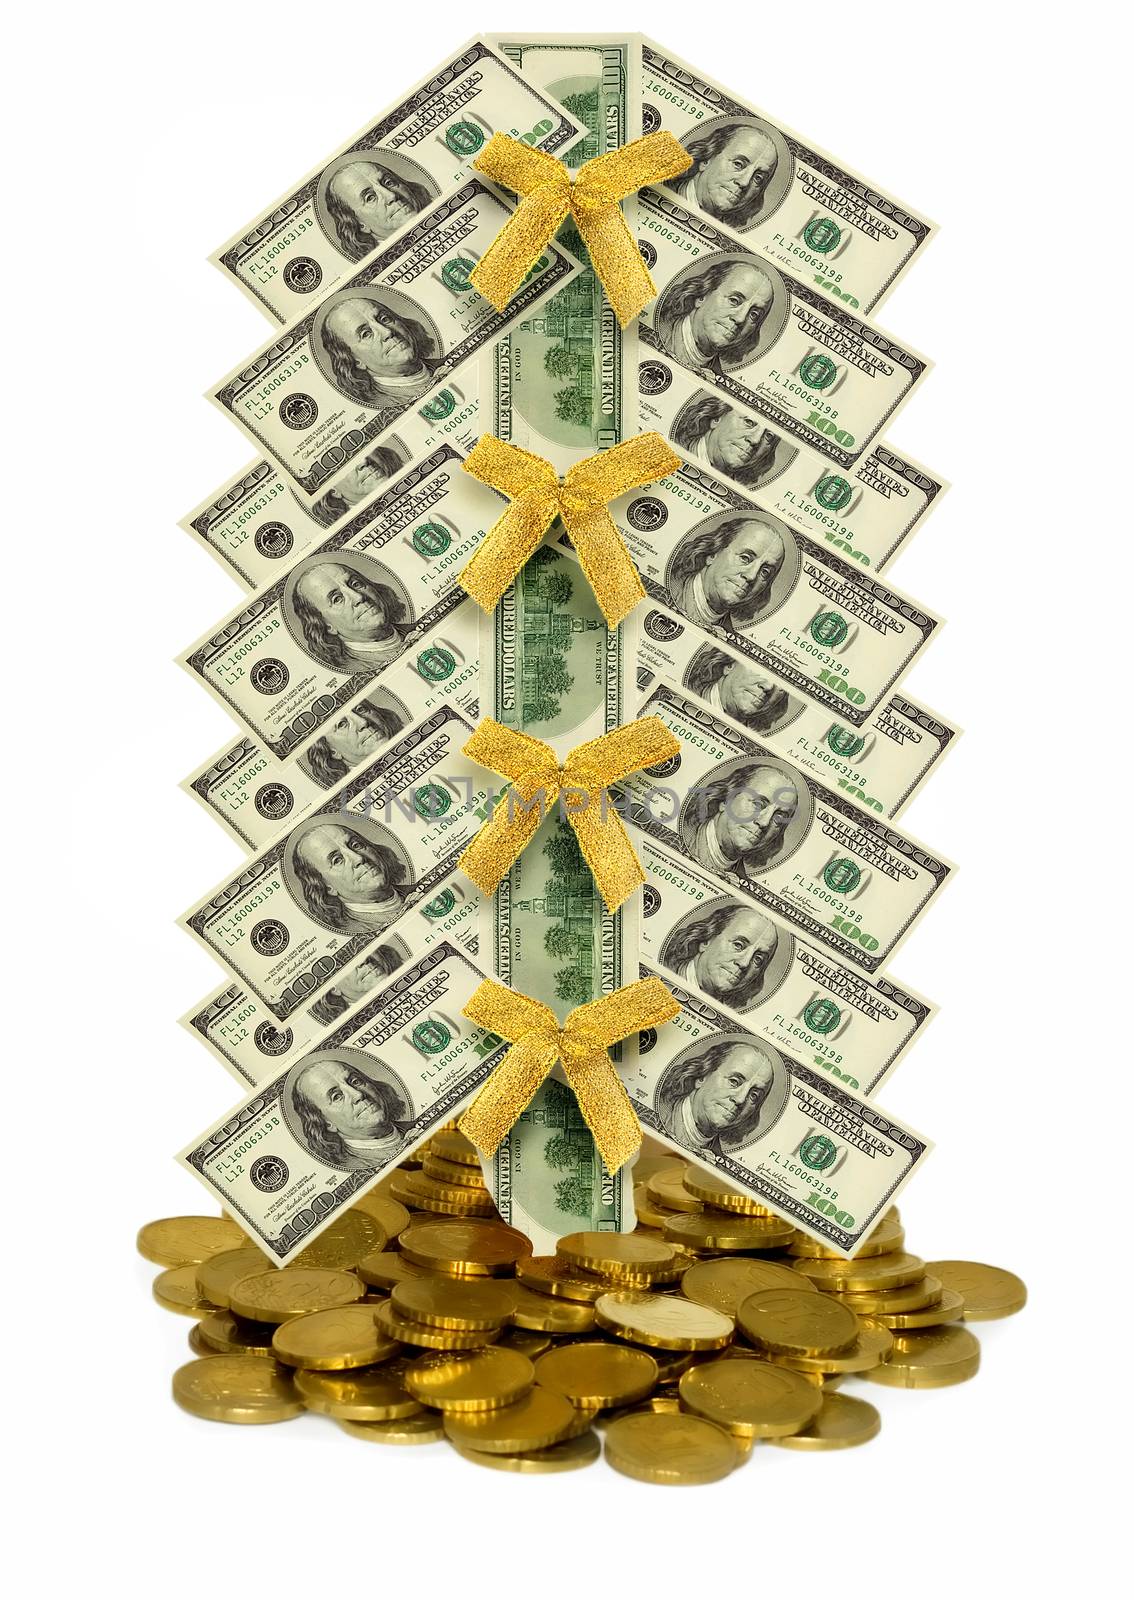 Money Christmas tree from different banknotes in gold Coins isolated on white background